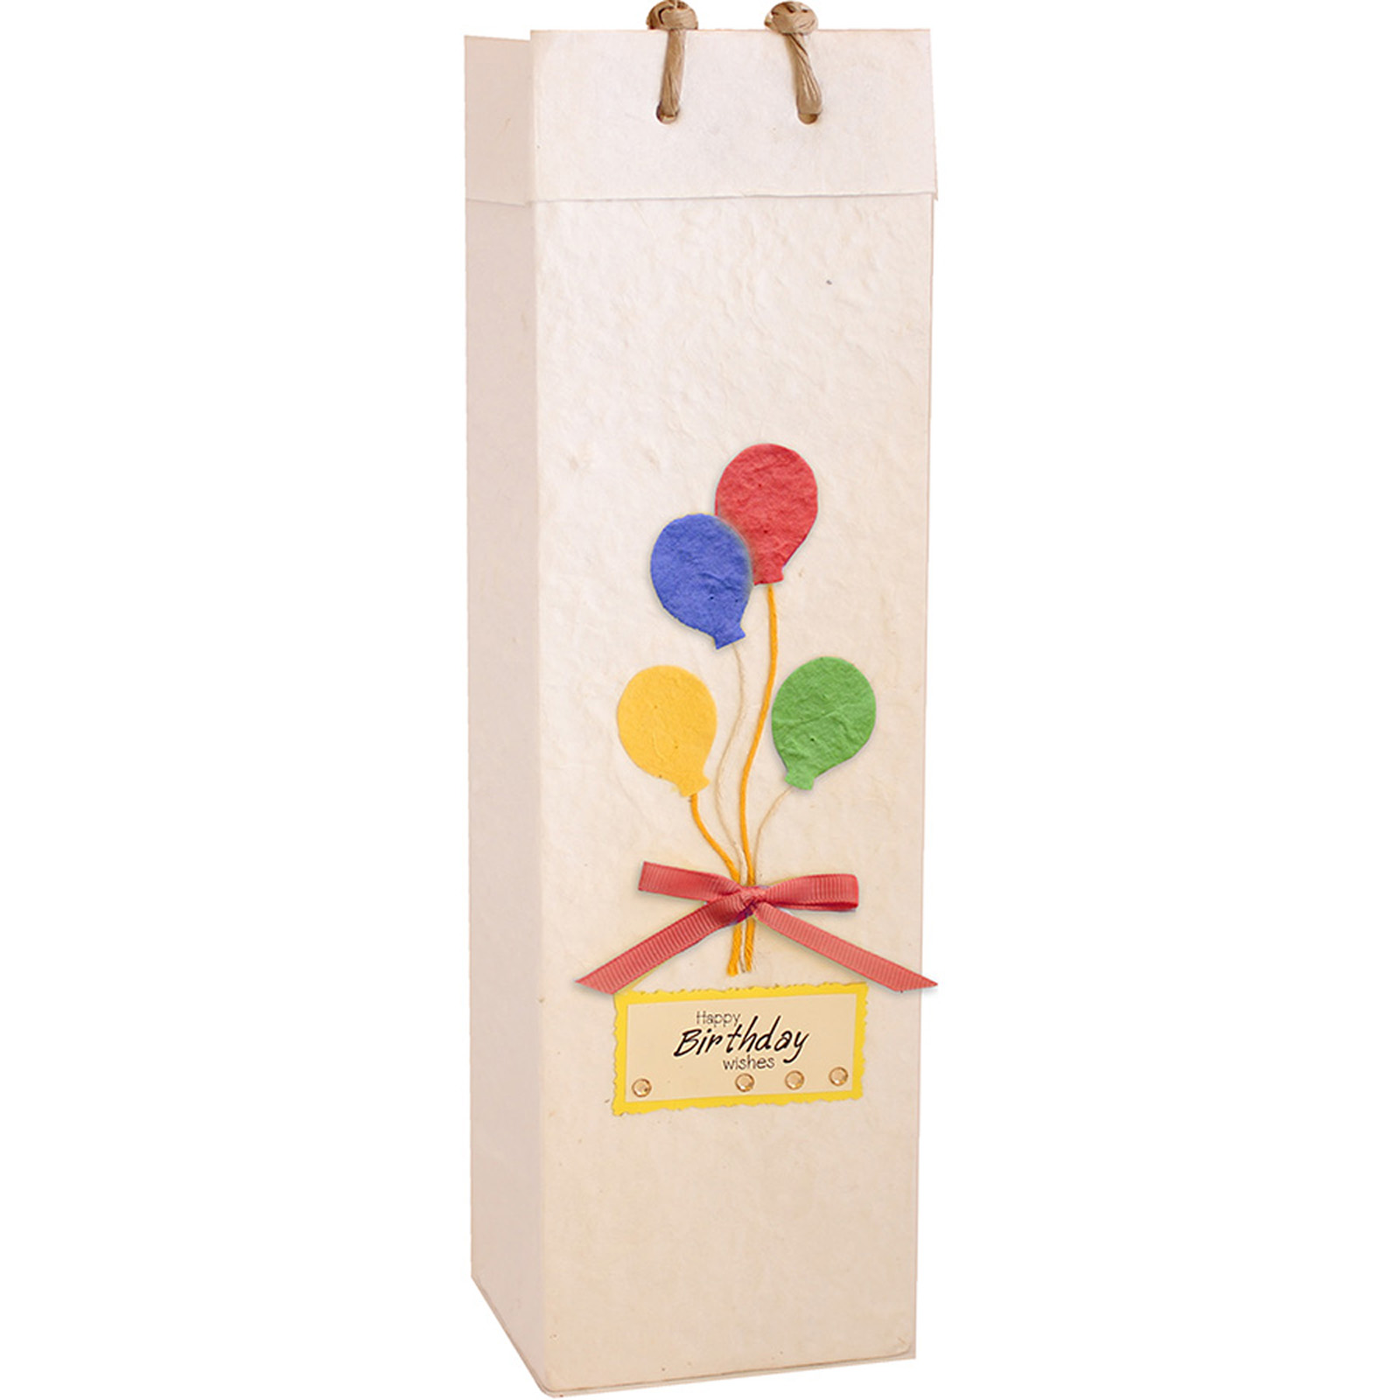 Olive Oil Gift Bags - Happy Birthday - Georgetown Olive Oil Co.